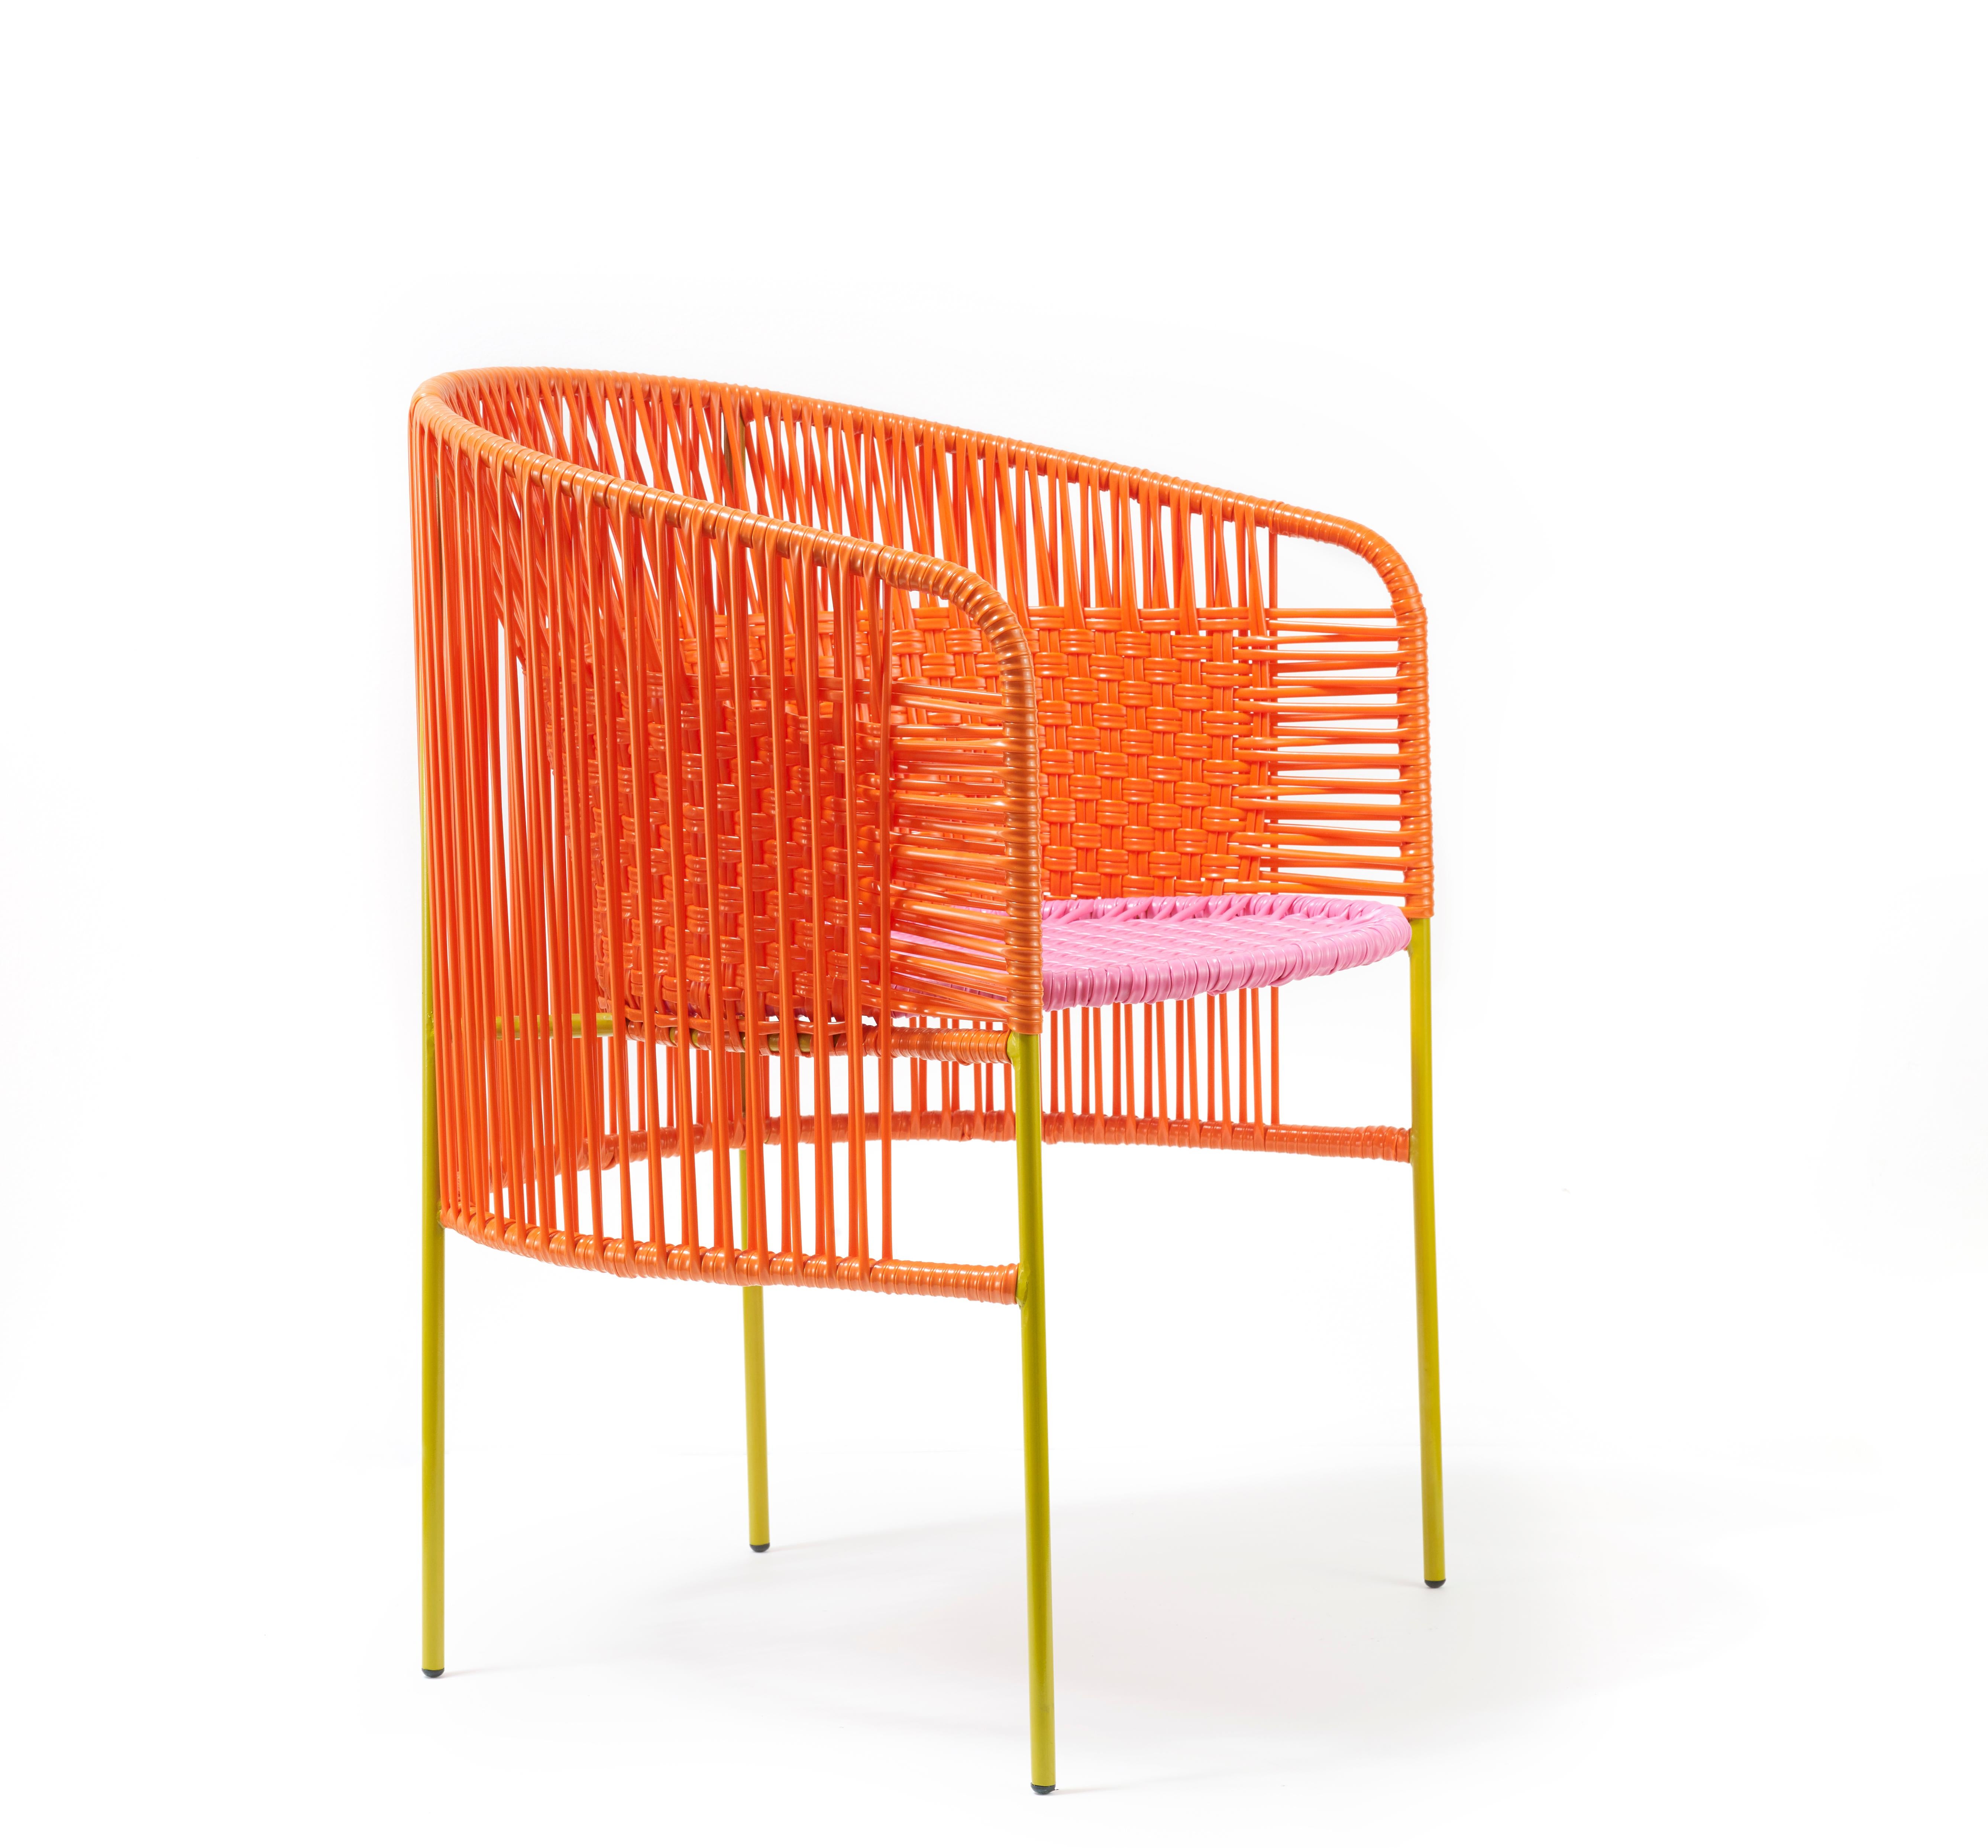 Set of 4 orange rose caribe dining chair by Sebastian Herkner
Materials: galvanized and powder-coated tubular steel. PVC strings are made from recycled plastic.
Technique: Made from recycled plastic and weaved by local craftspeople in Colombia.